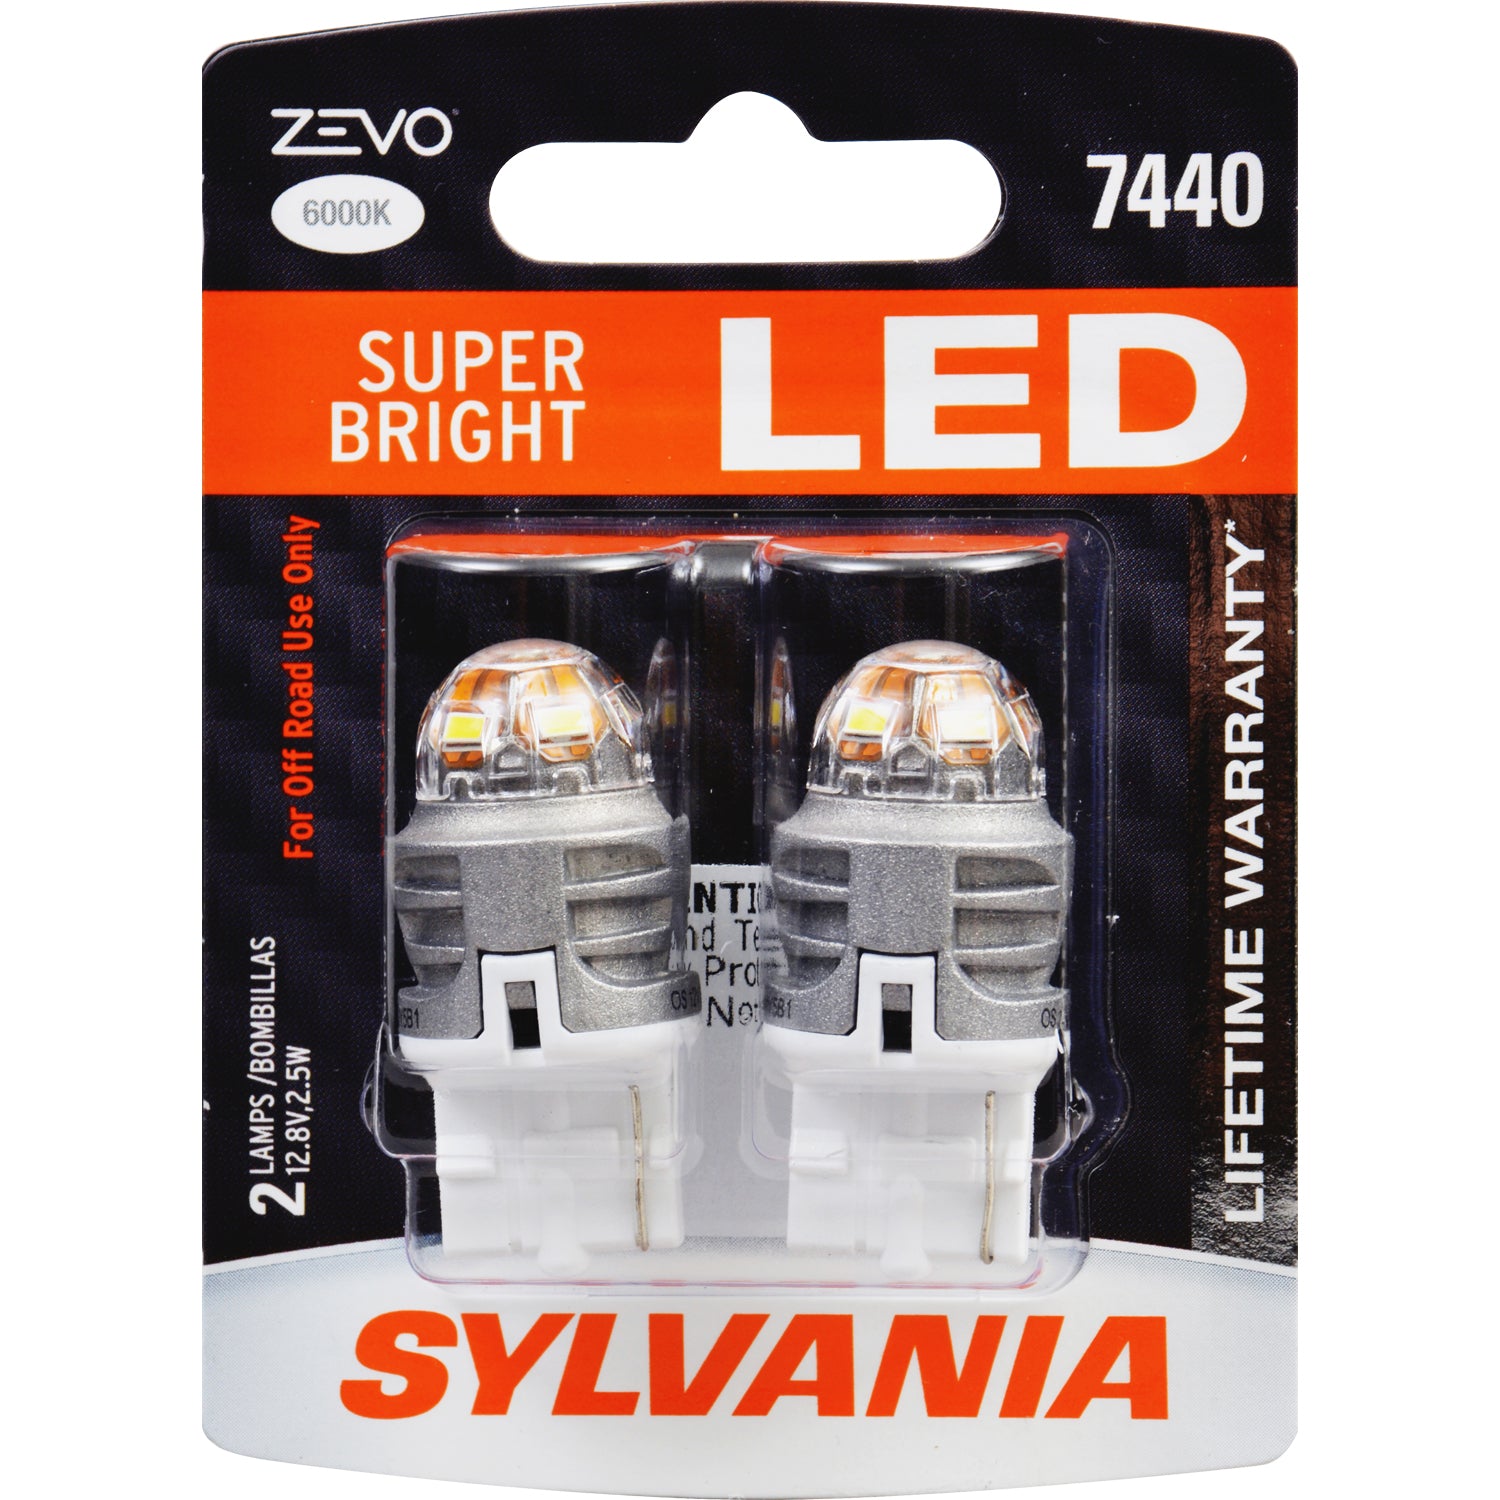 automotive led replacement bulbs - 100 results